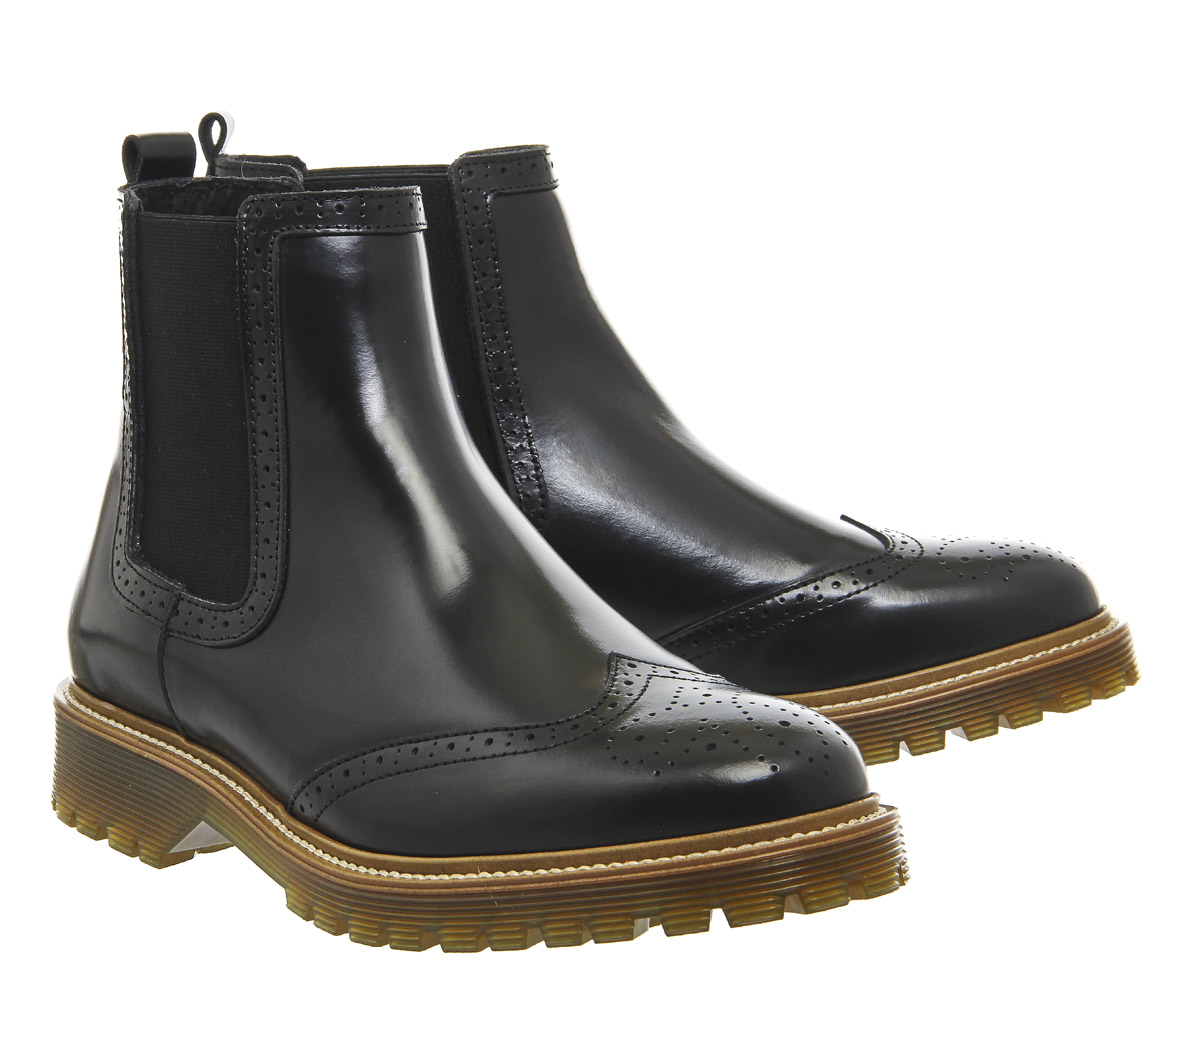 Office Careless Brogue Chelsea Boots Black Gloss Leather - Boots